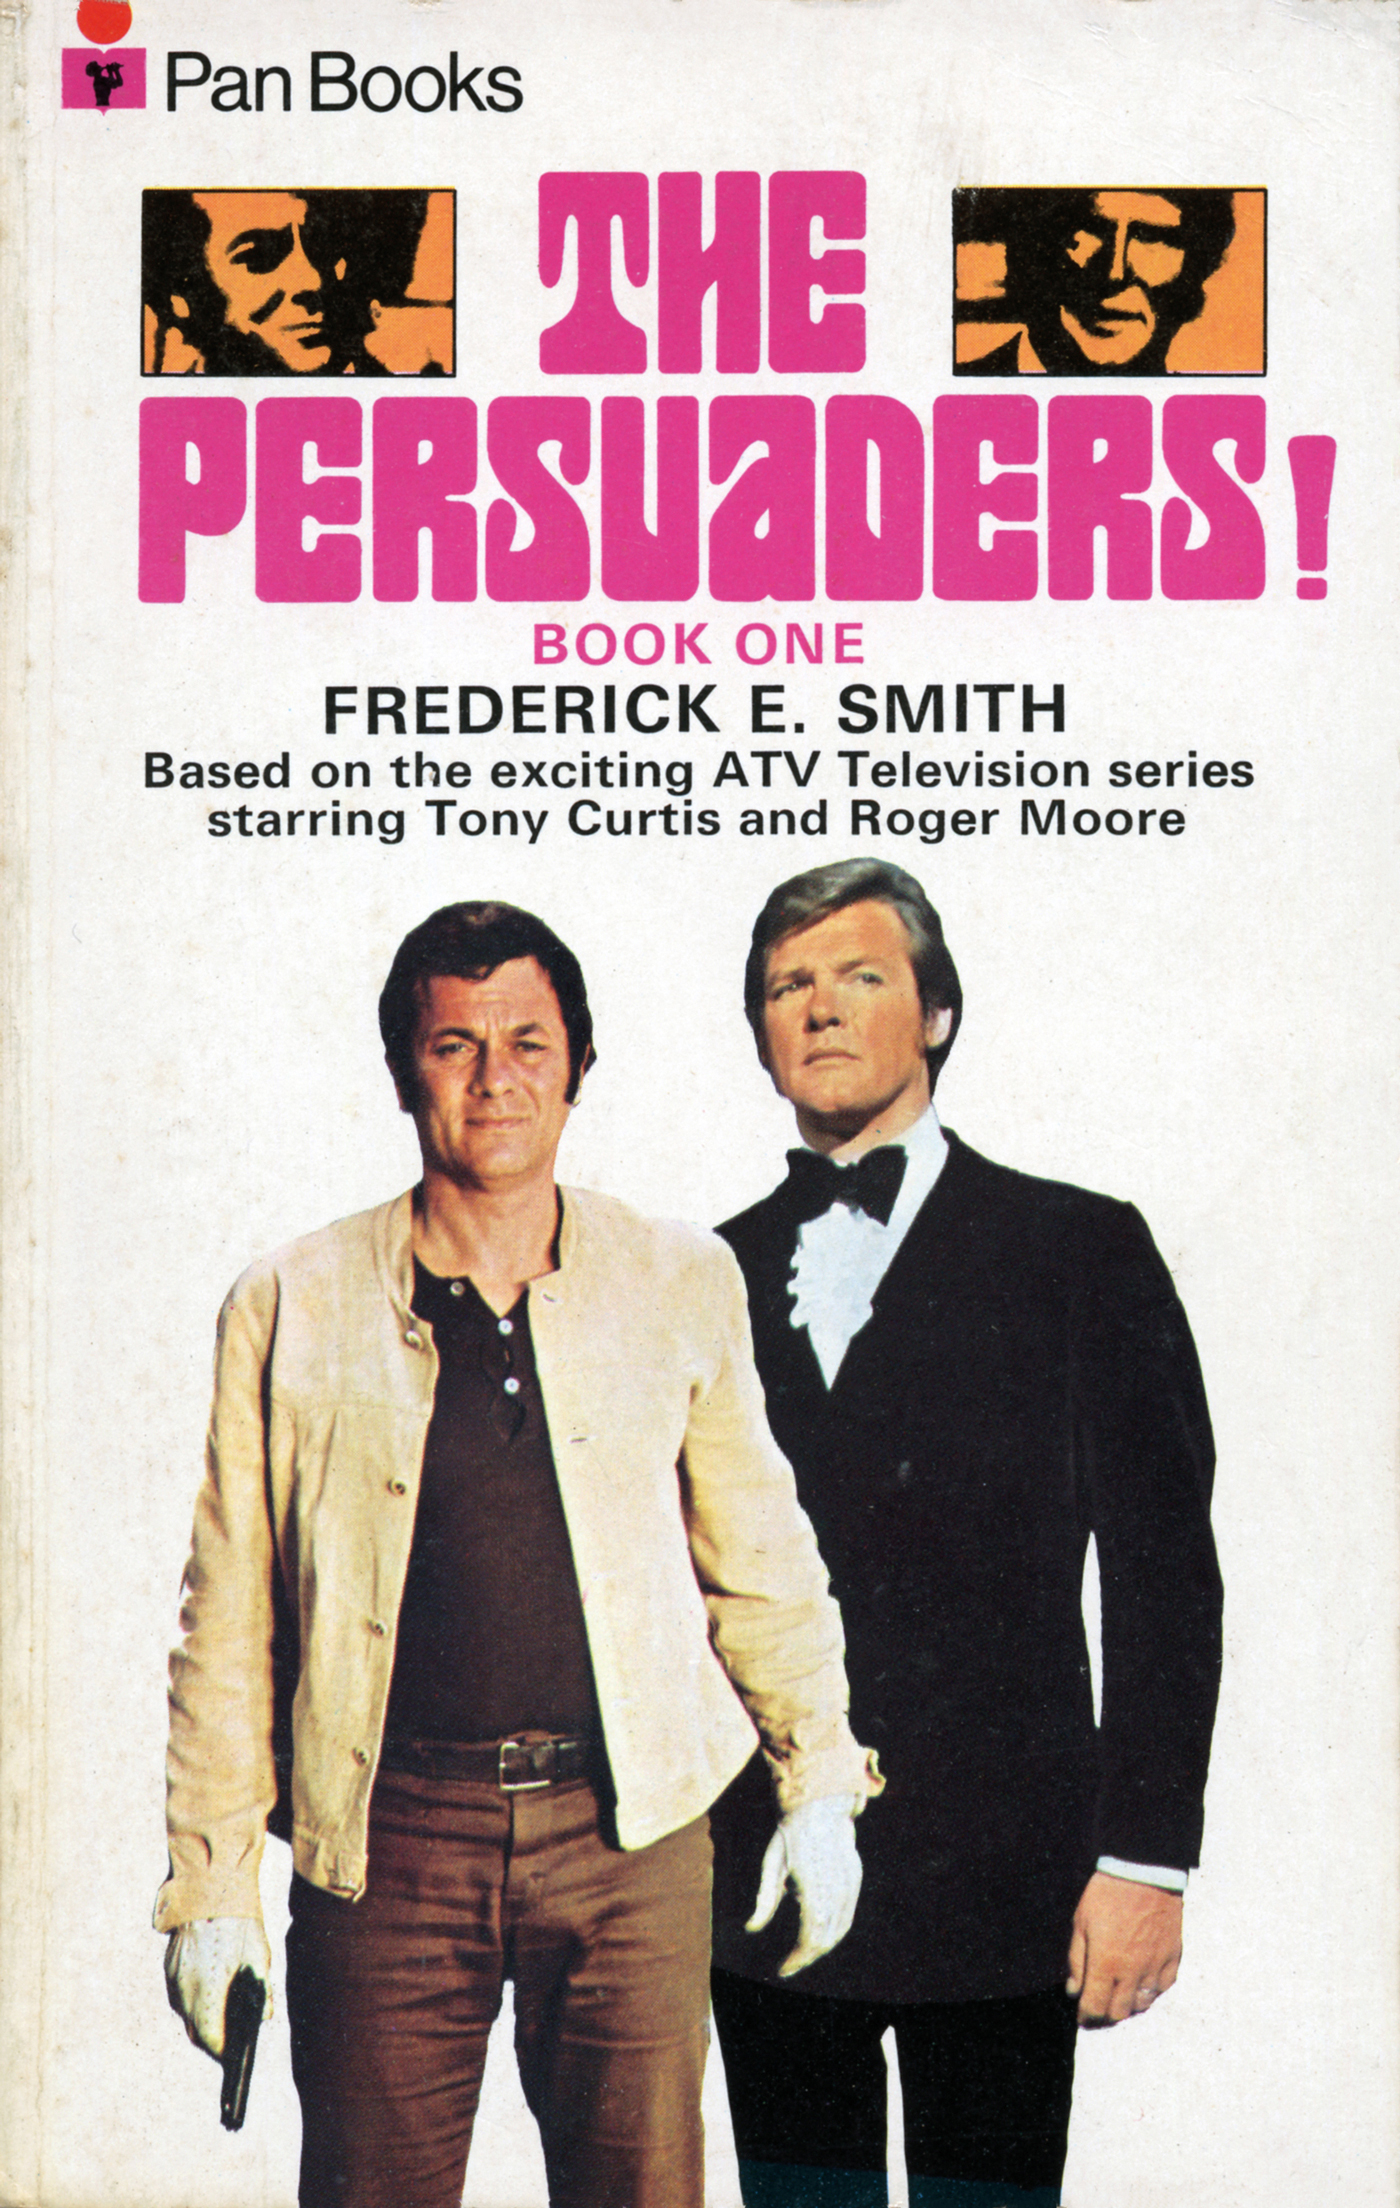 The Persuaders! opening alts and book covers - Fonts In Use